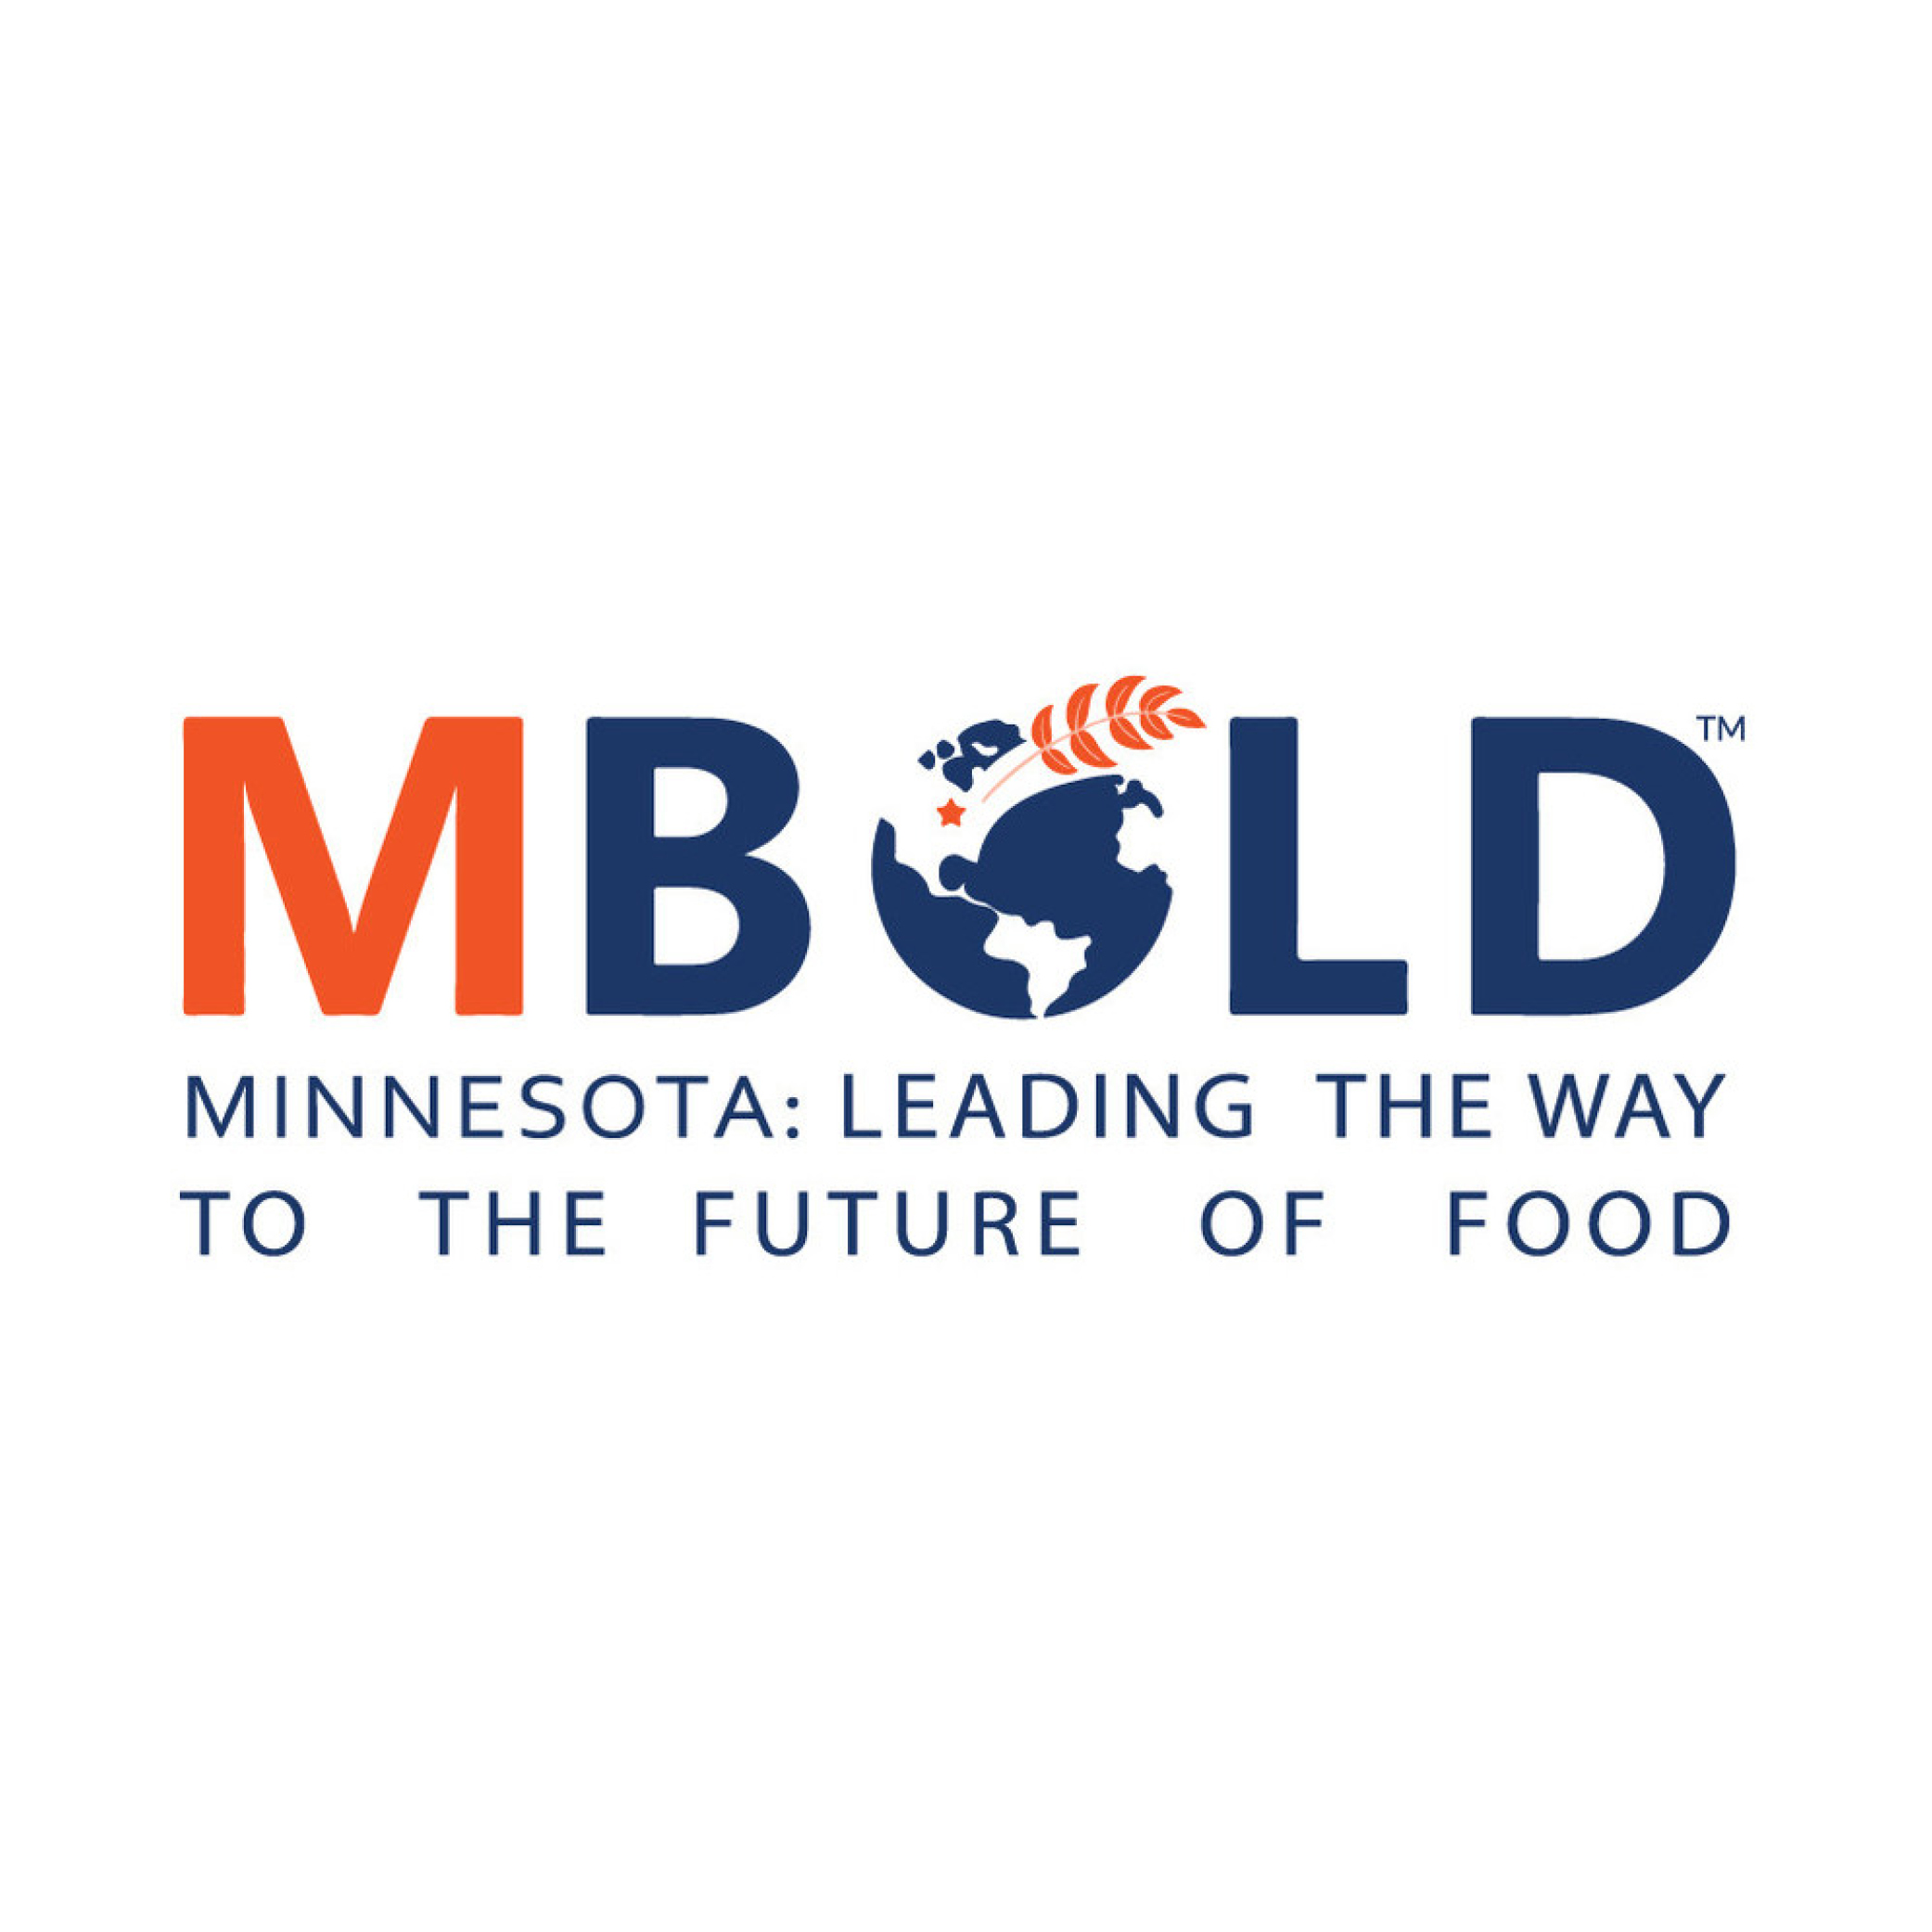 Minnesota: Leading the way to the future of food